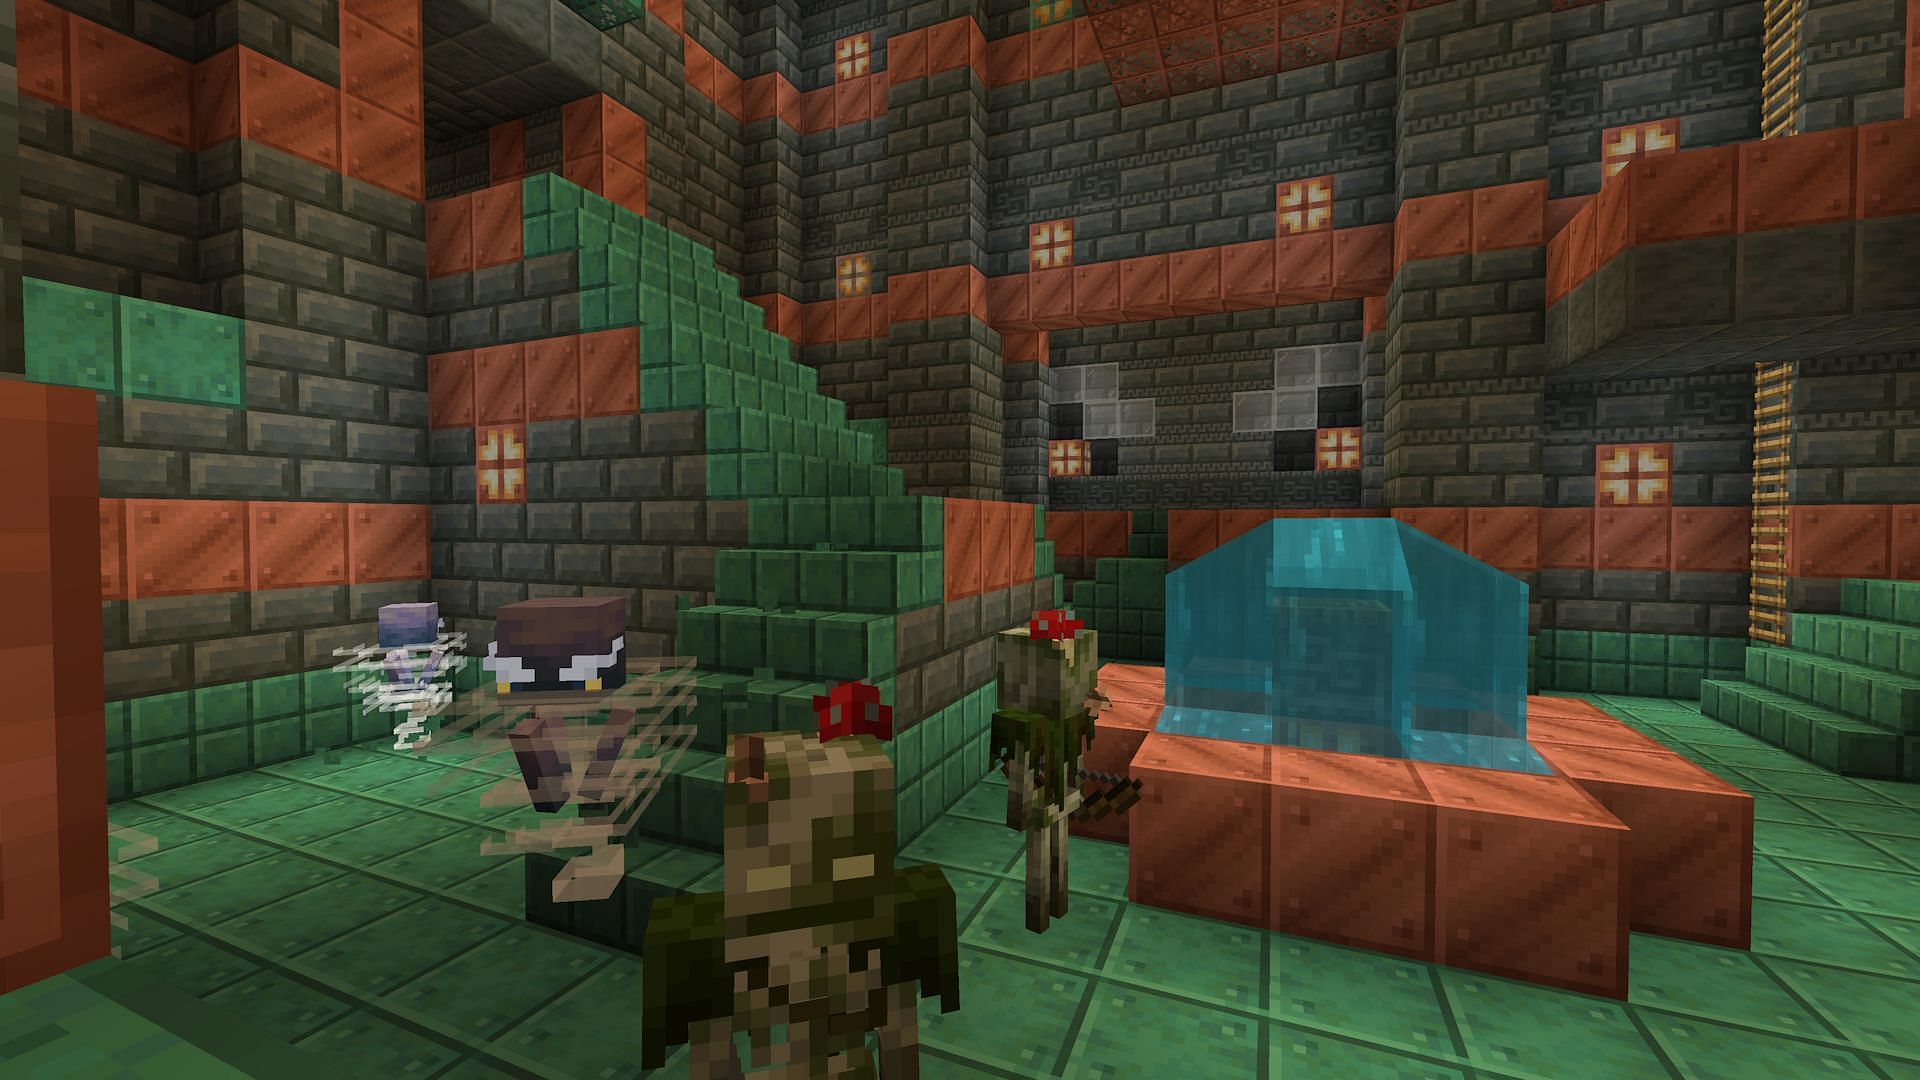 Hostile mobs within a trial chamber (Image via Mojang)